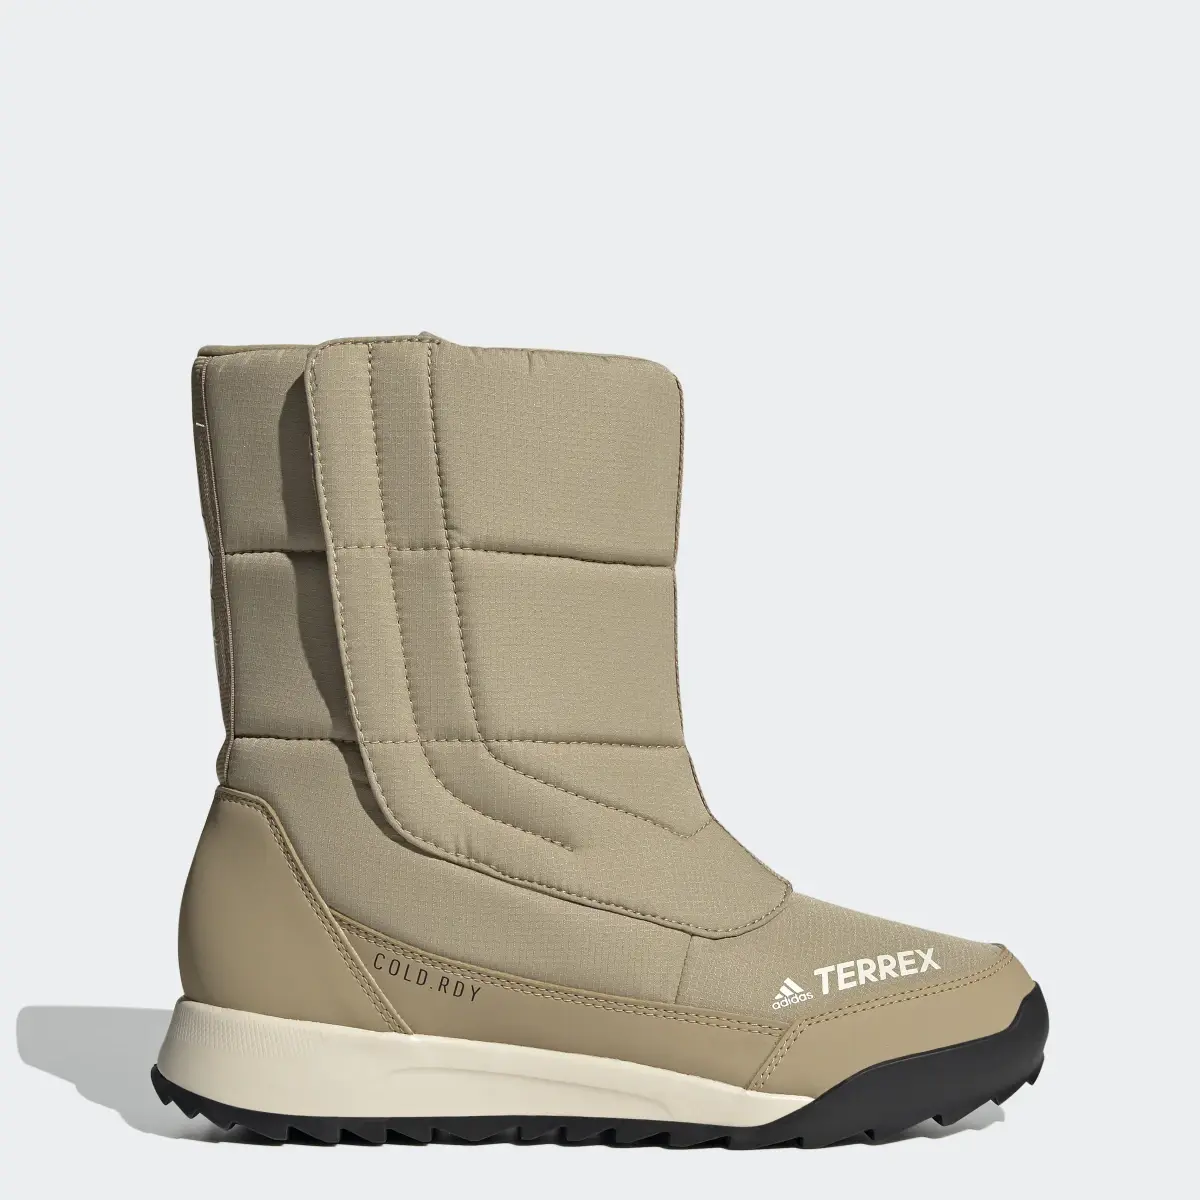 Adidas Terrex Choleah COLD.RDY Boots. 1